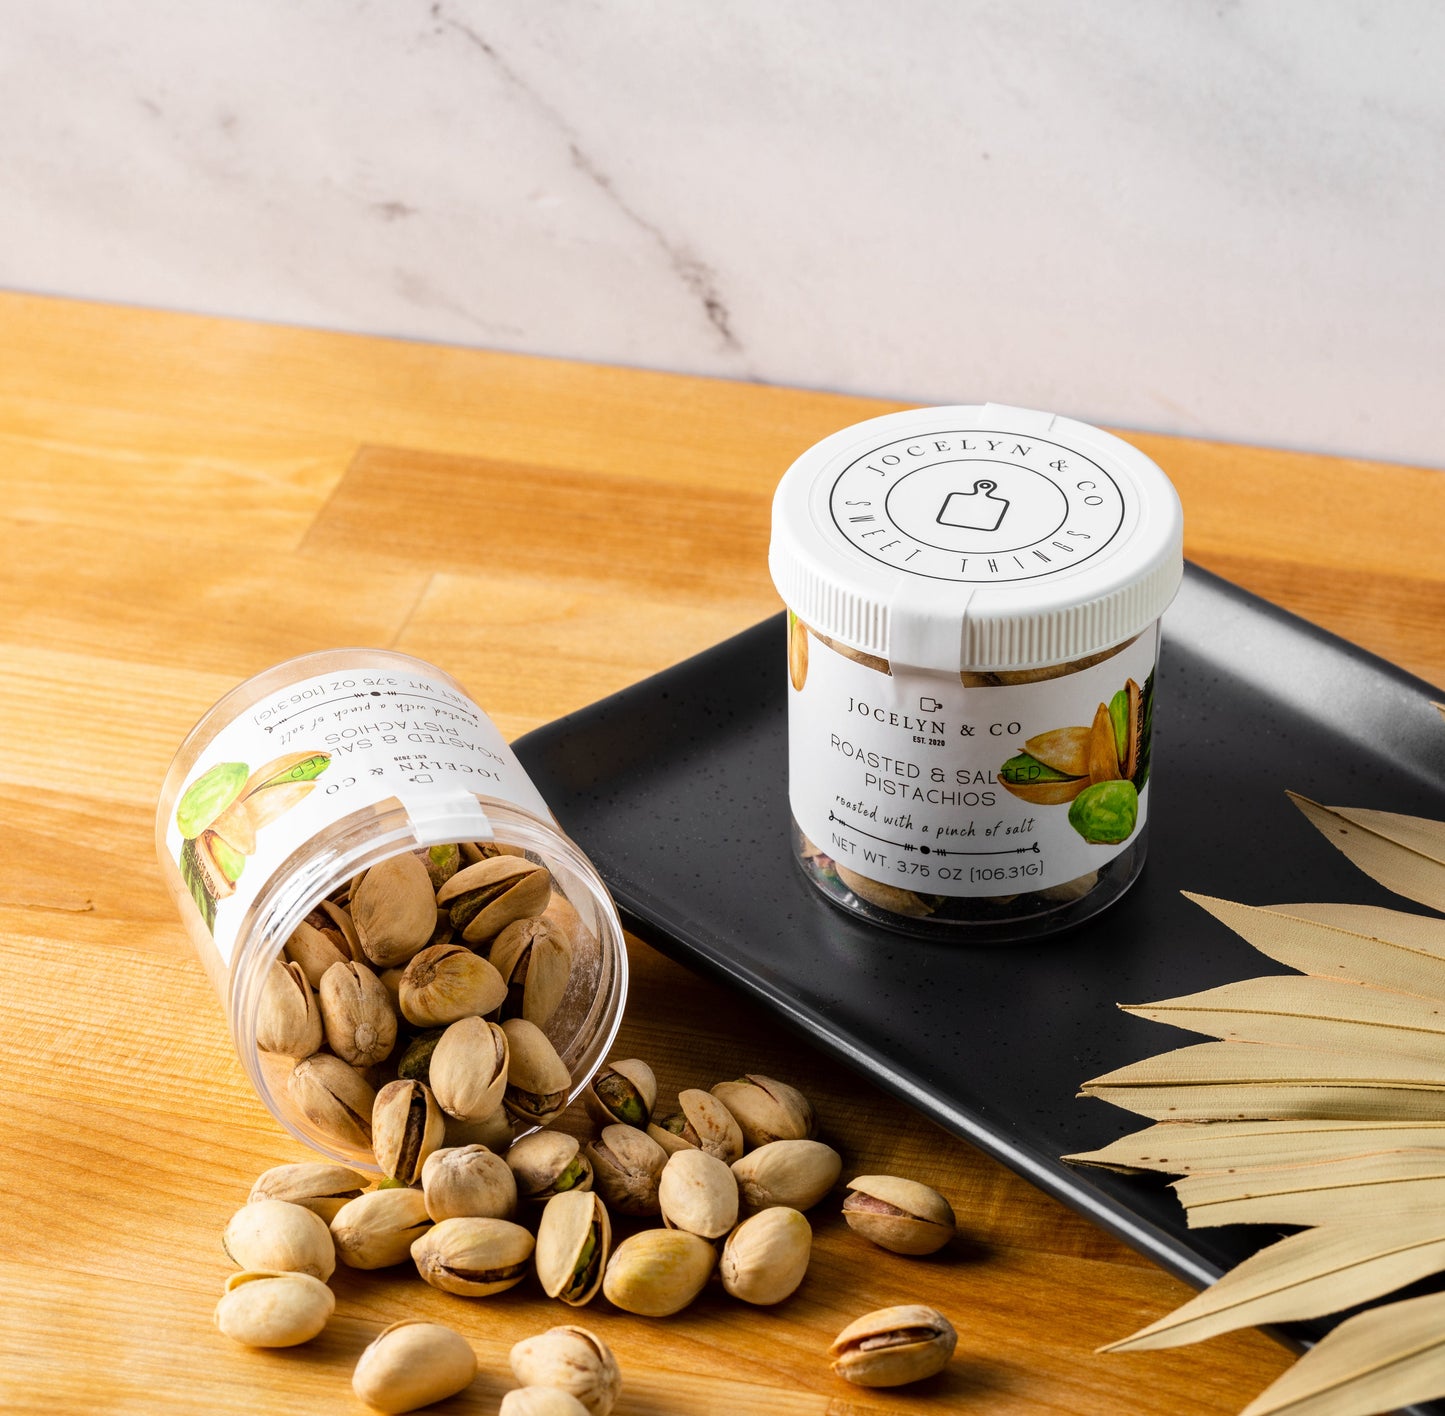 Private Label Packaging Only for Pistachios Jar-250